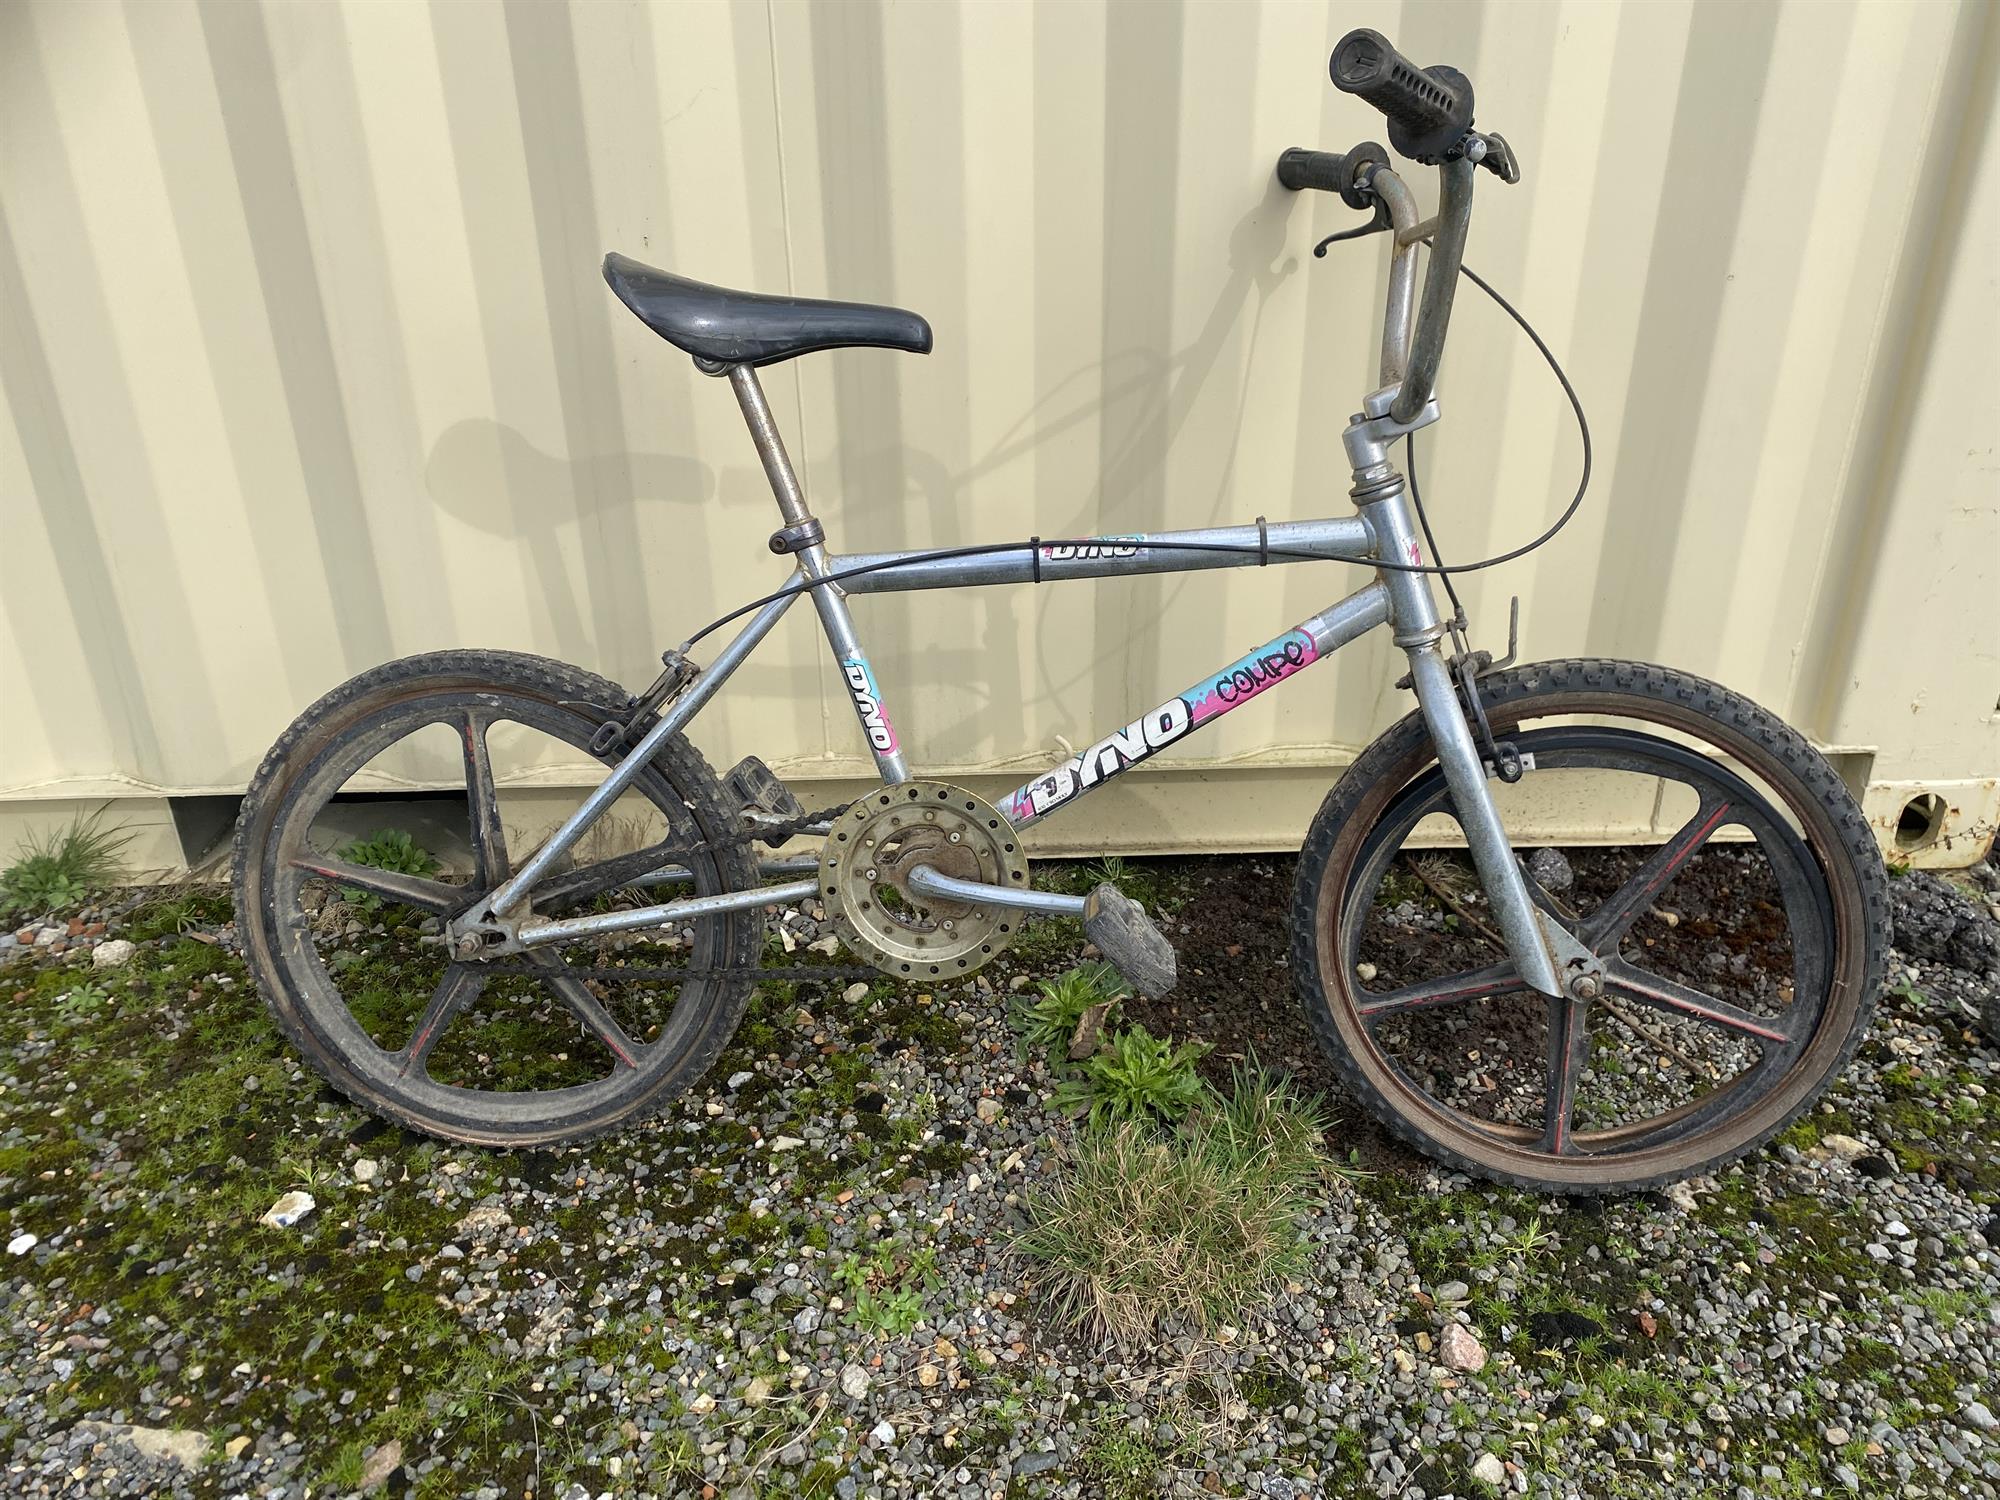 BMX bike circa 1980's. Restoration project for any BMX enthusiast. Please note this lot has the